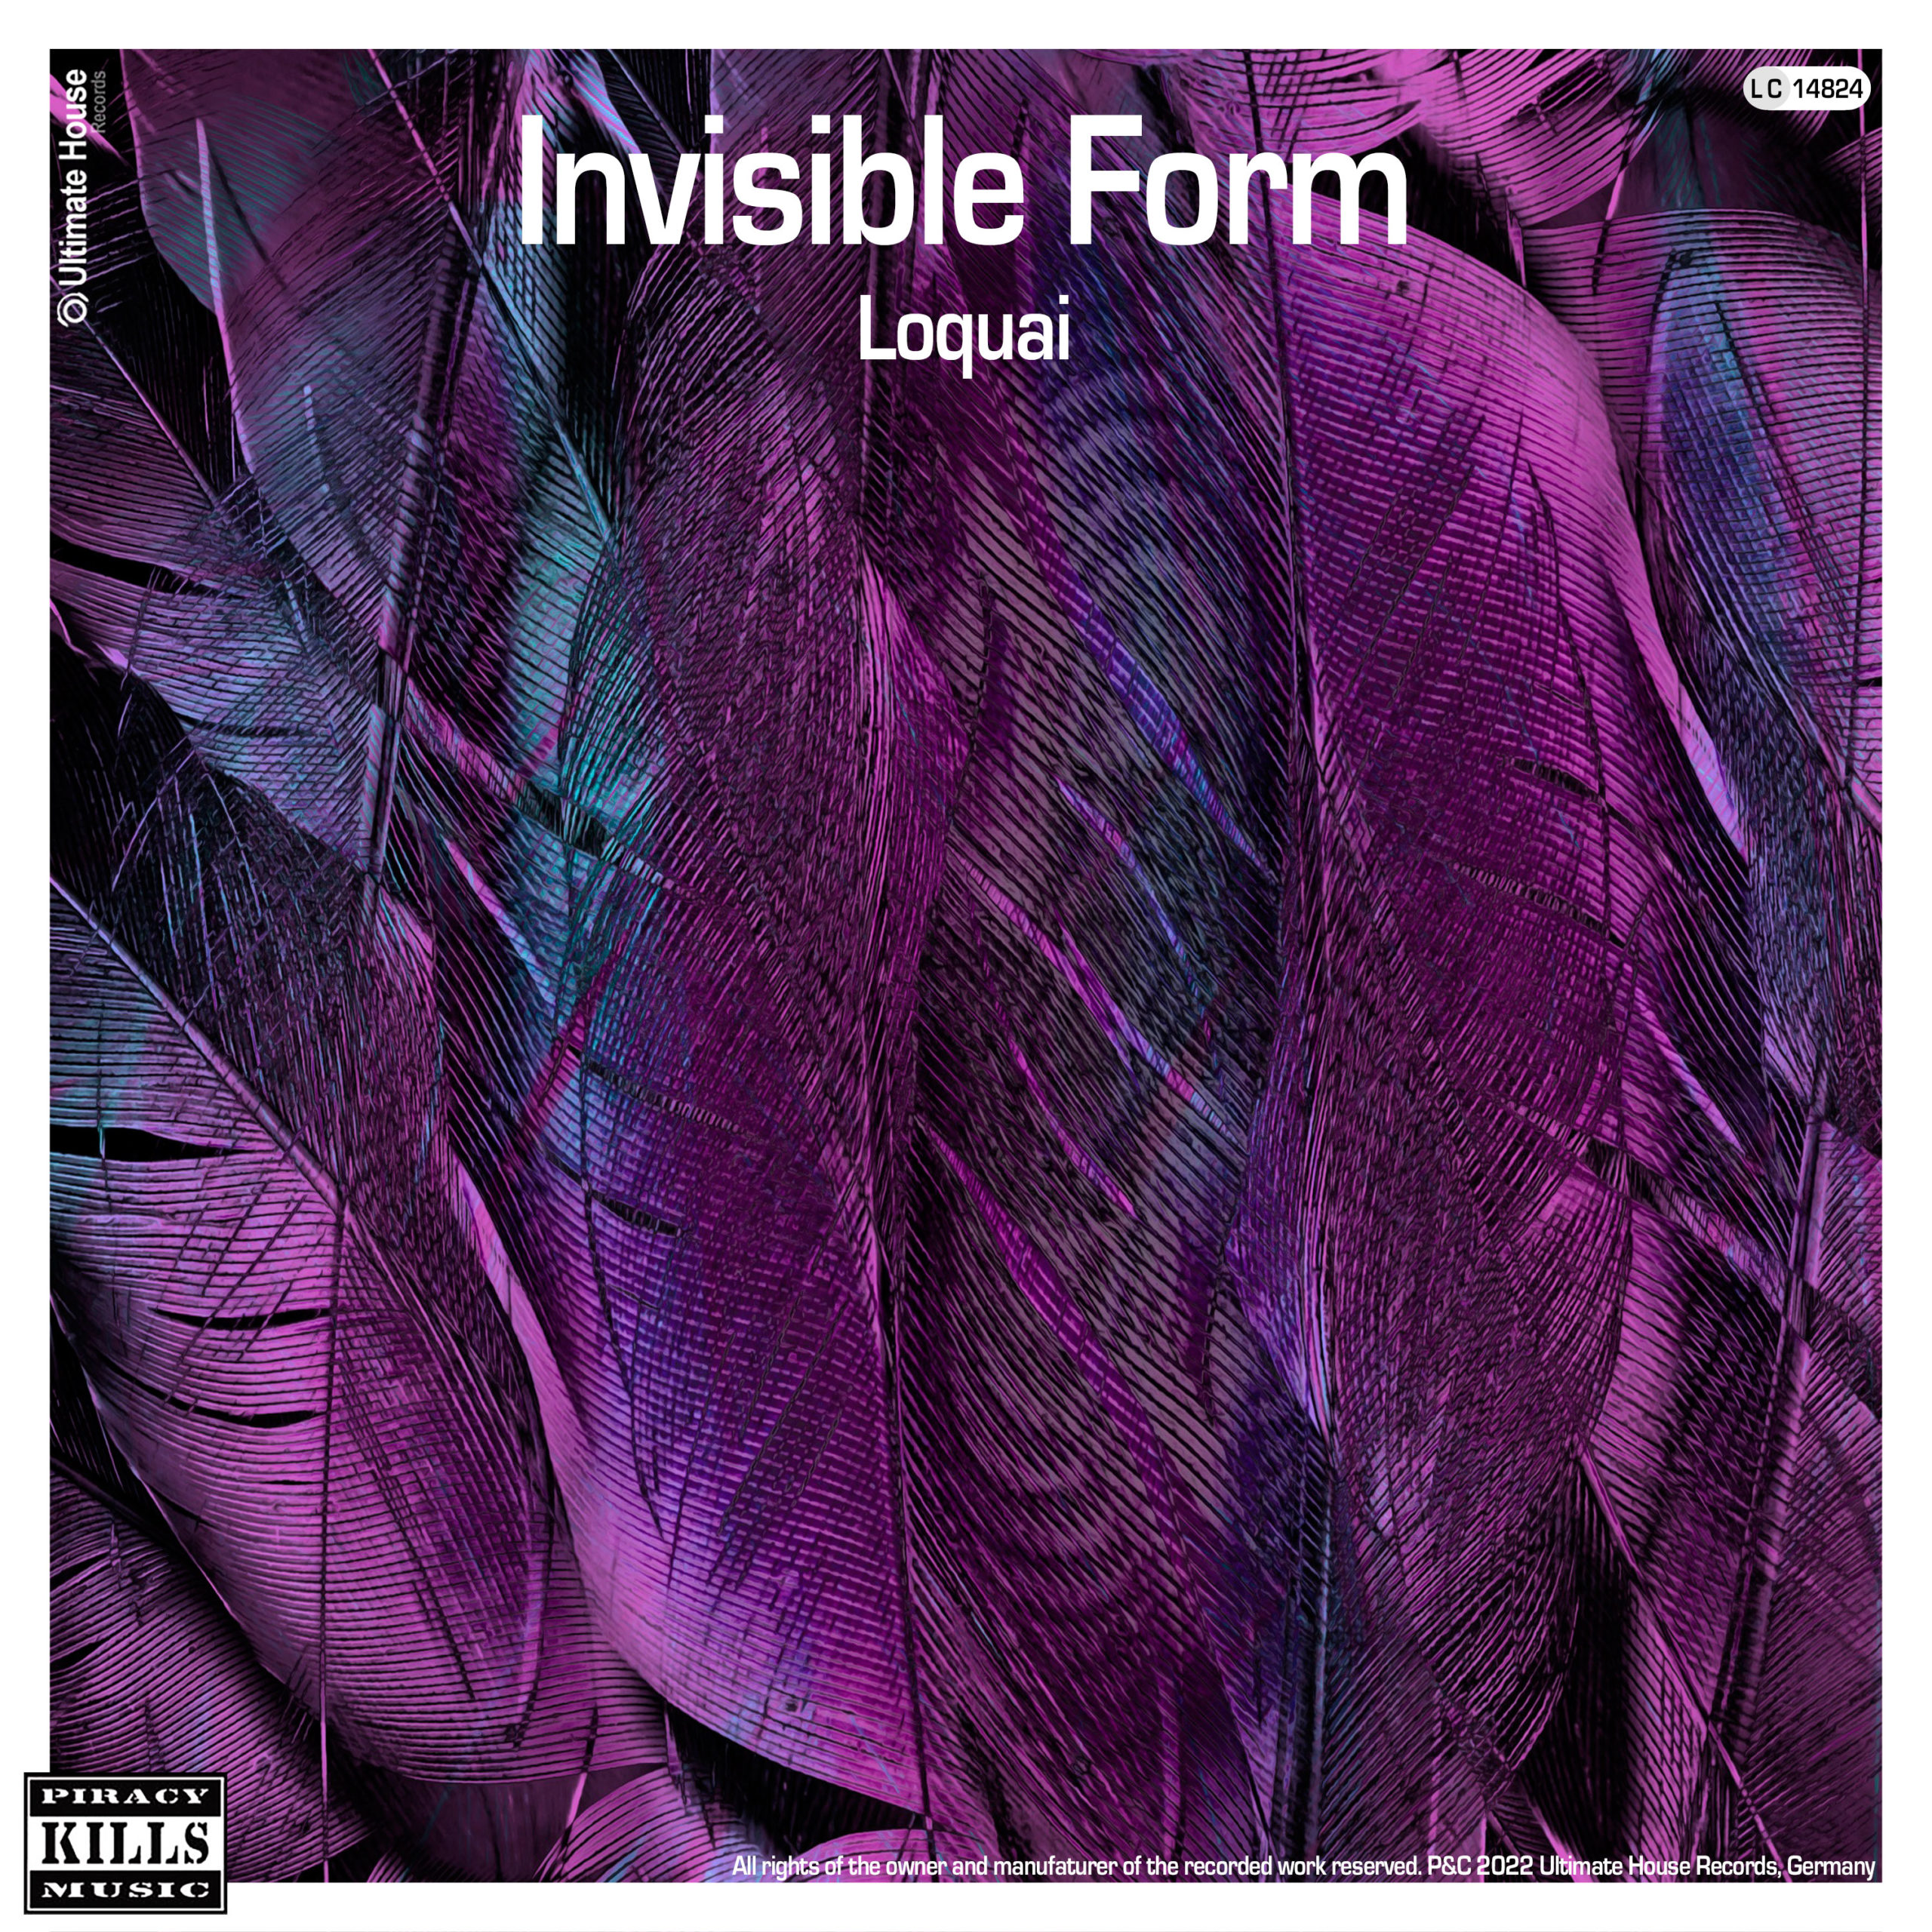 https://www.ultimate-house-records.com/wp-content/uploads/2022/05/159-Invisible_Form-Cover_3000px_web-scaled.jpg